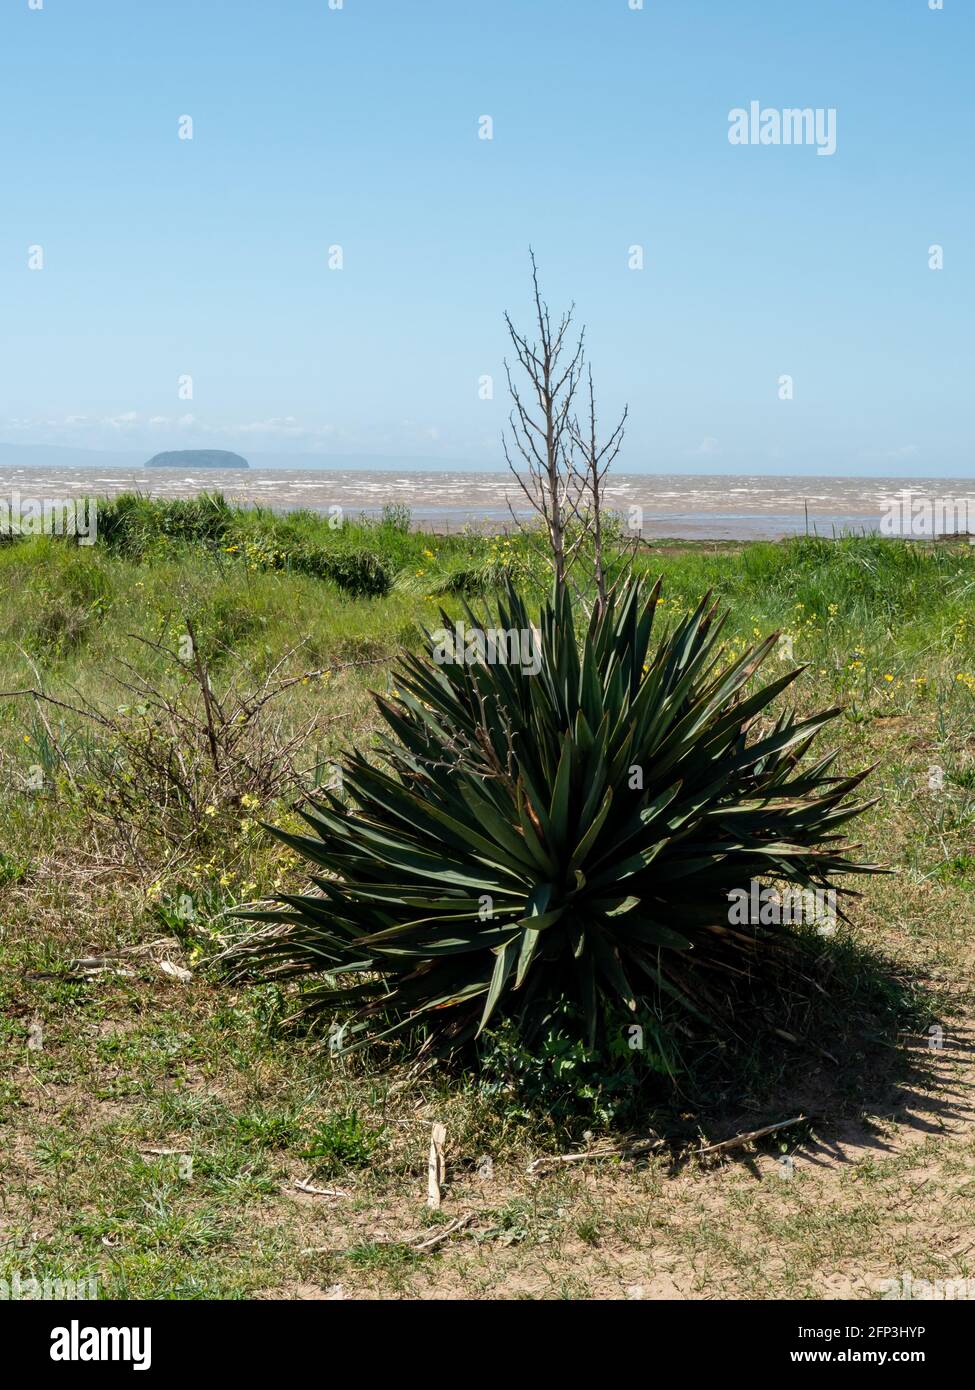 A plant amongst dunes on Sand Bay, near Weston-super-Mare, with Steepholm Island in the background. Stock Photo